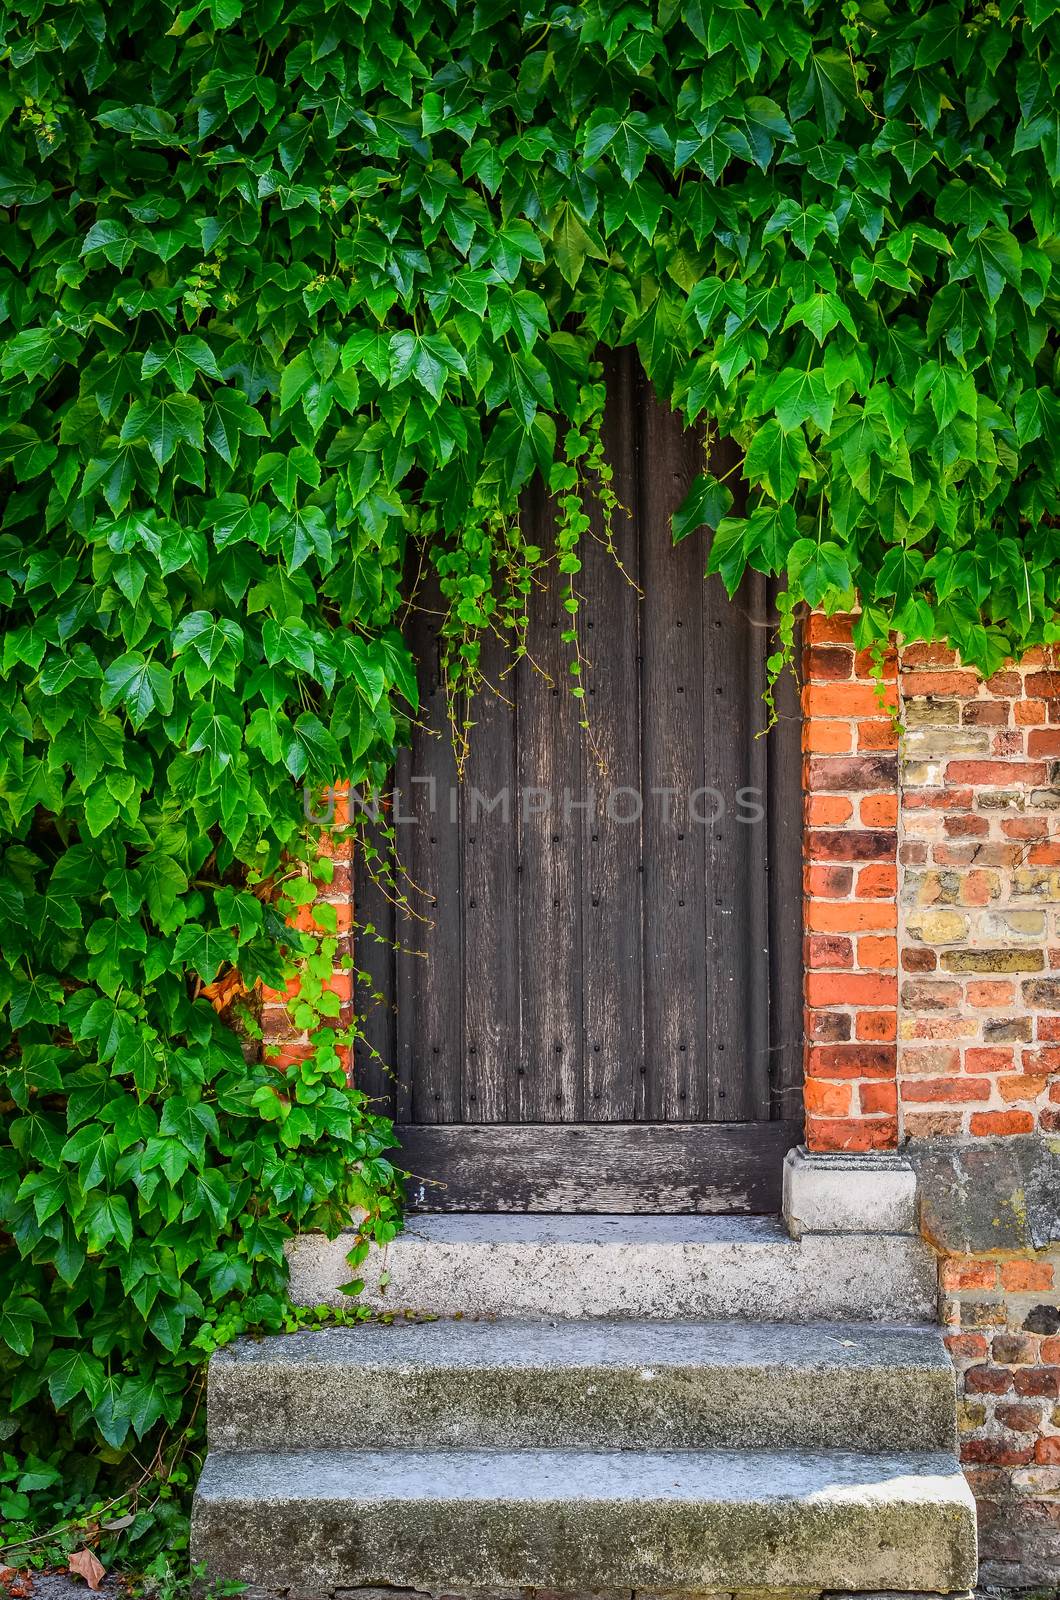 Wooden doors in brick wall covered with green plant leaves by martinm303